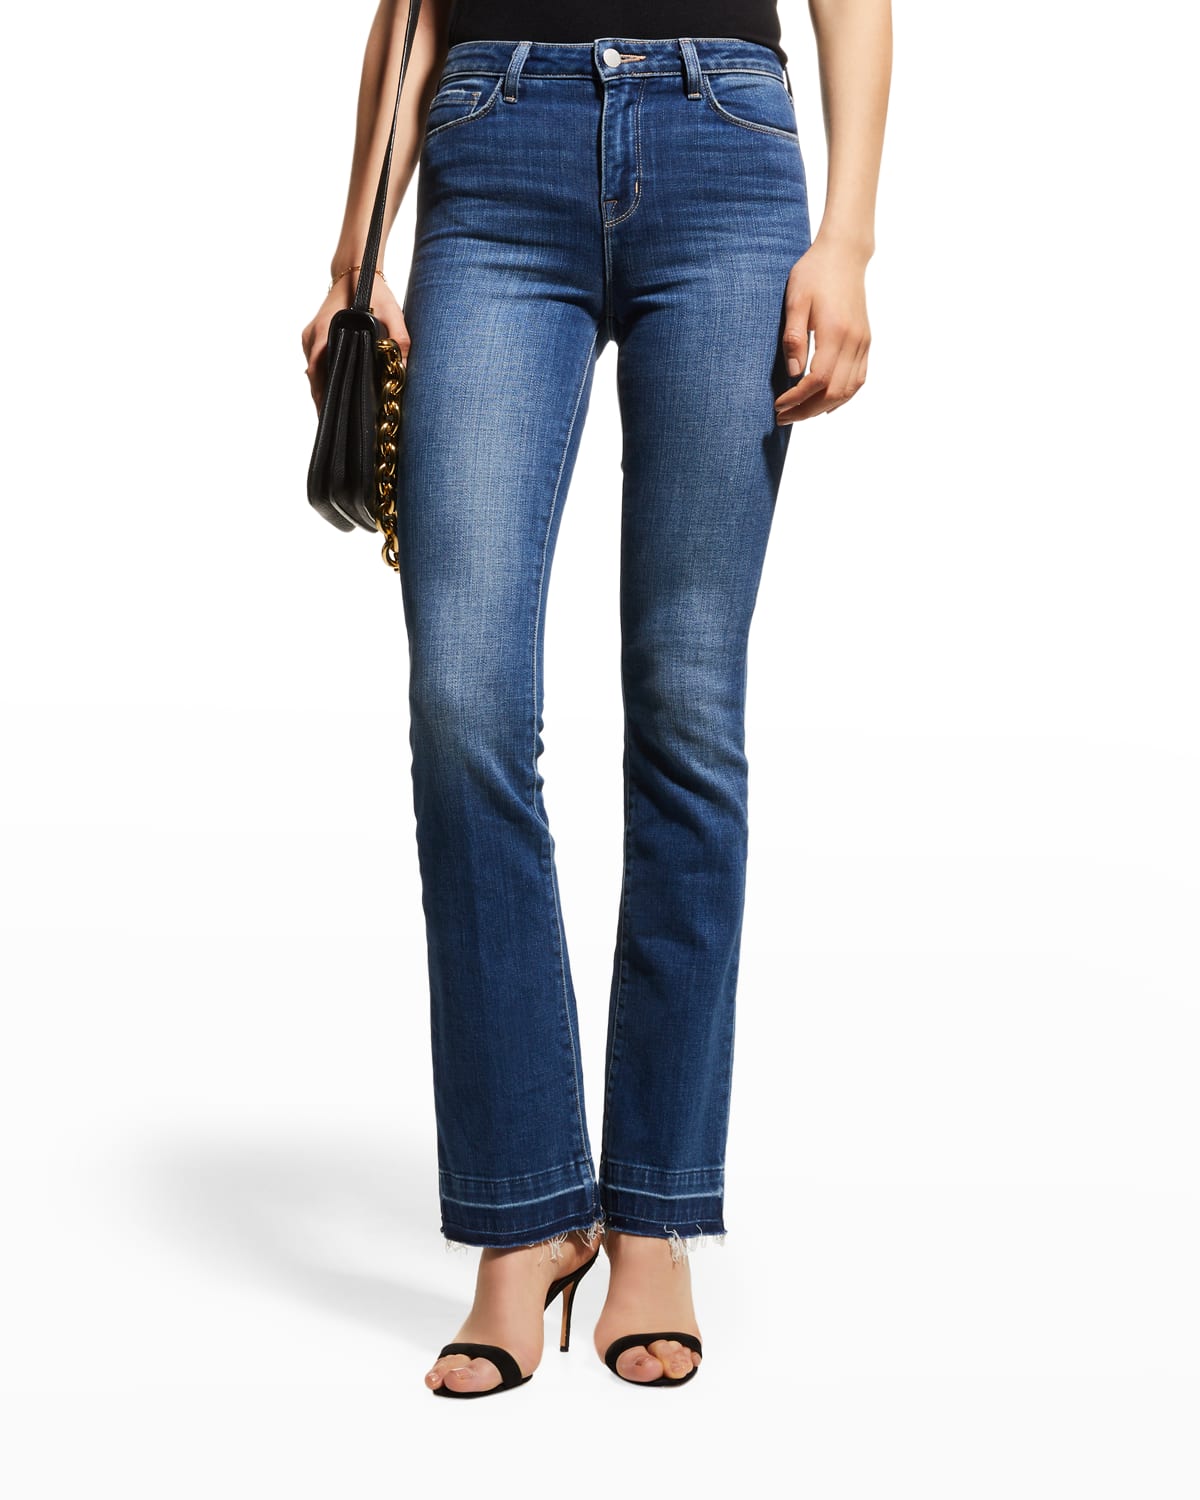 L'Agence Ruth High-Rise Straight Jean with Undone Hem